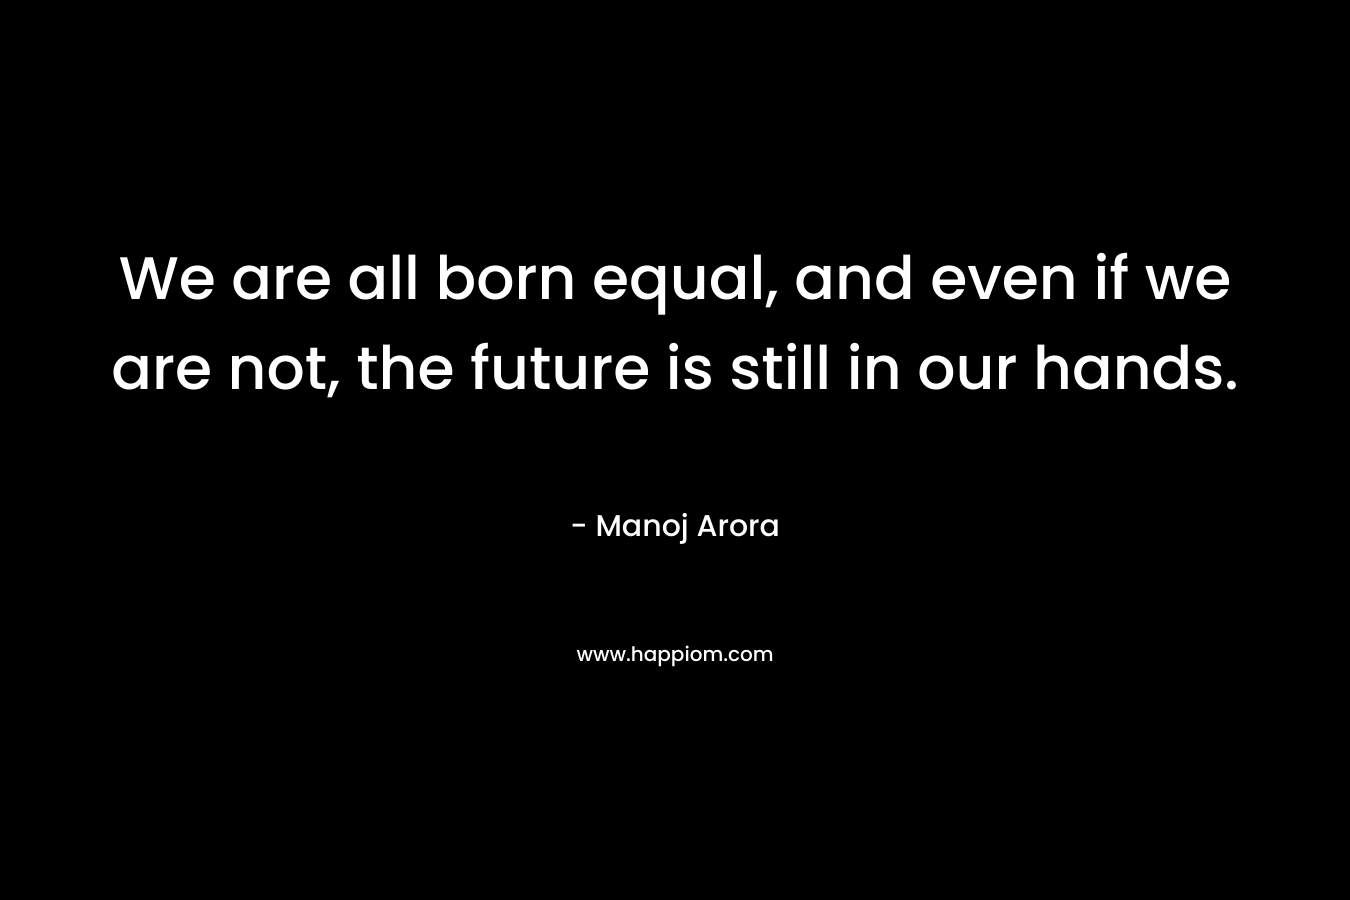 We are all born equal, and even if we are not, the future is still in our hands.